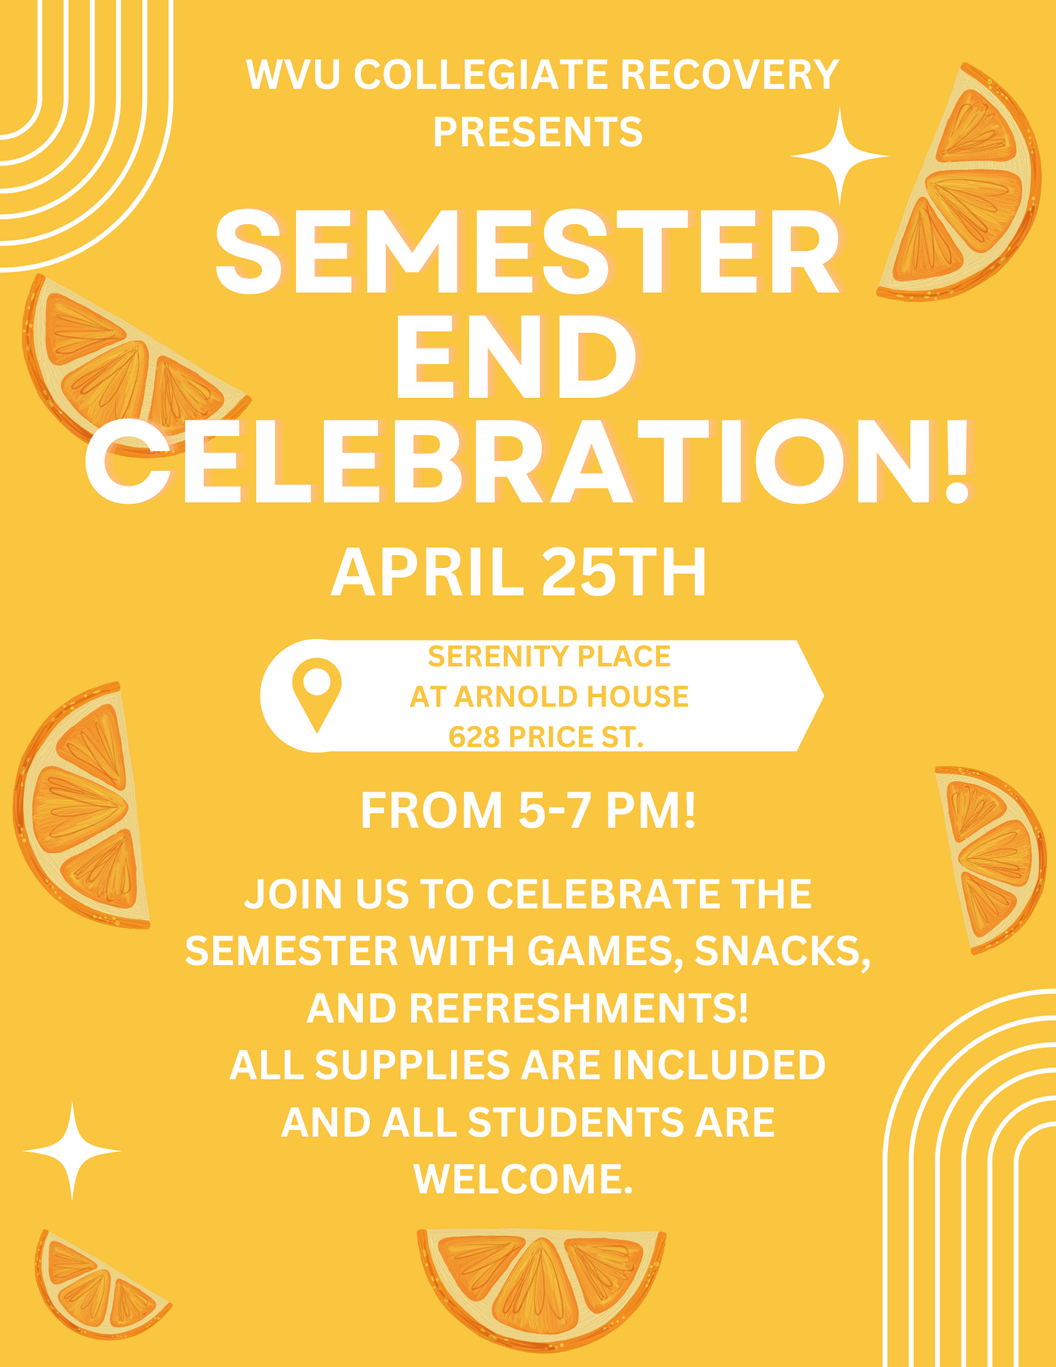 WVU Collegiate Recovery presents End of the Semester Celebration on 4/25 from 5 to 7pm at 628 Price St. There will be game, snacks, and refreshments! All students are welcome!